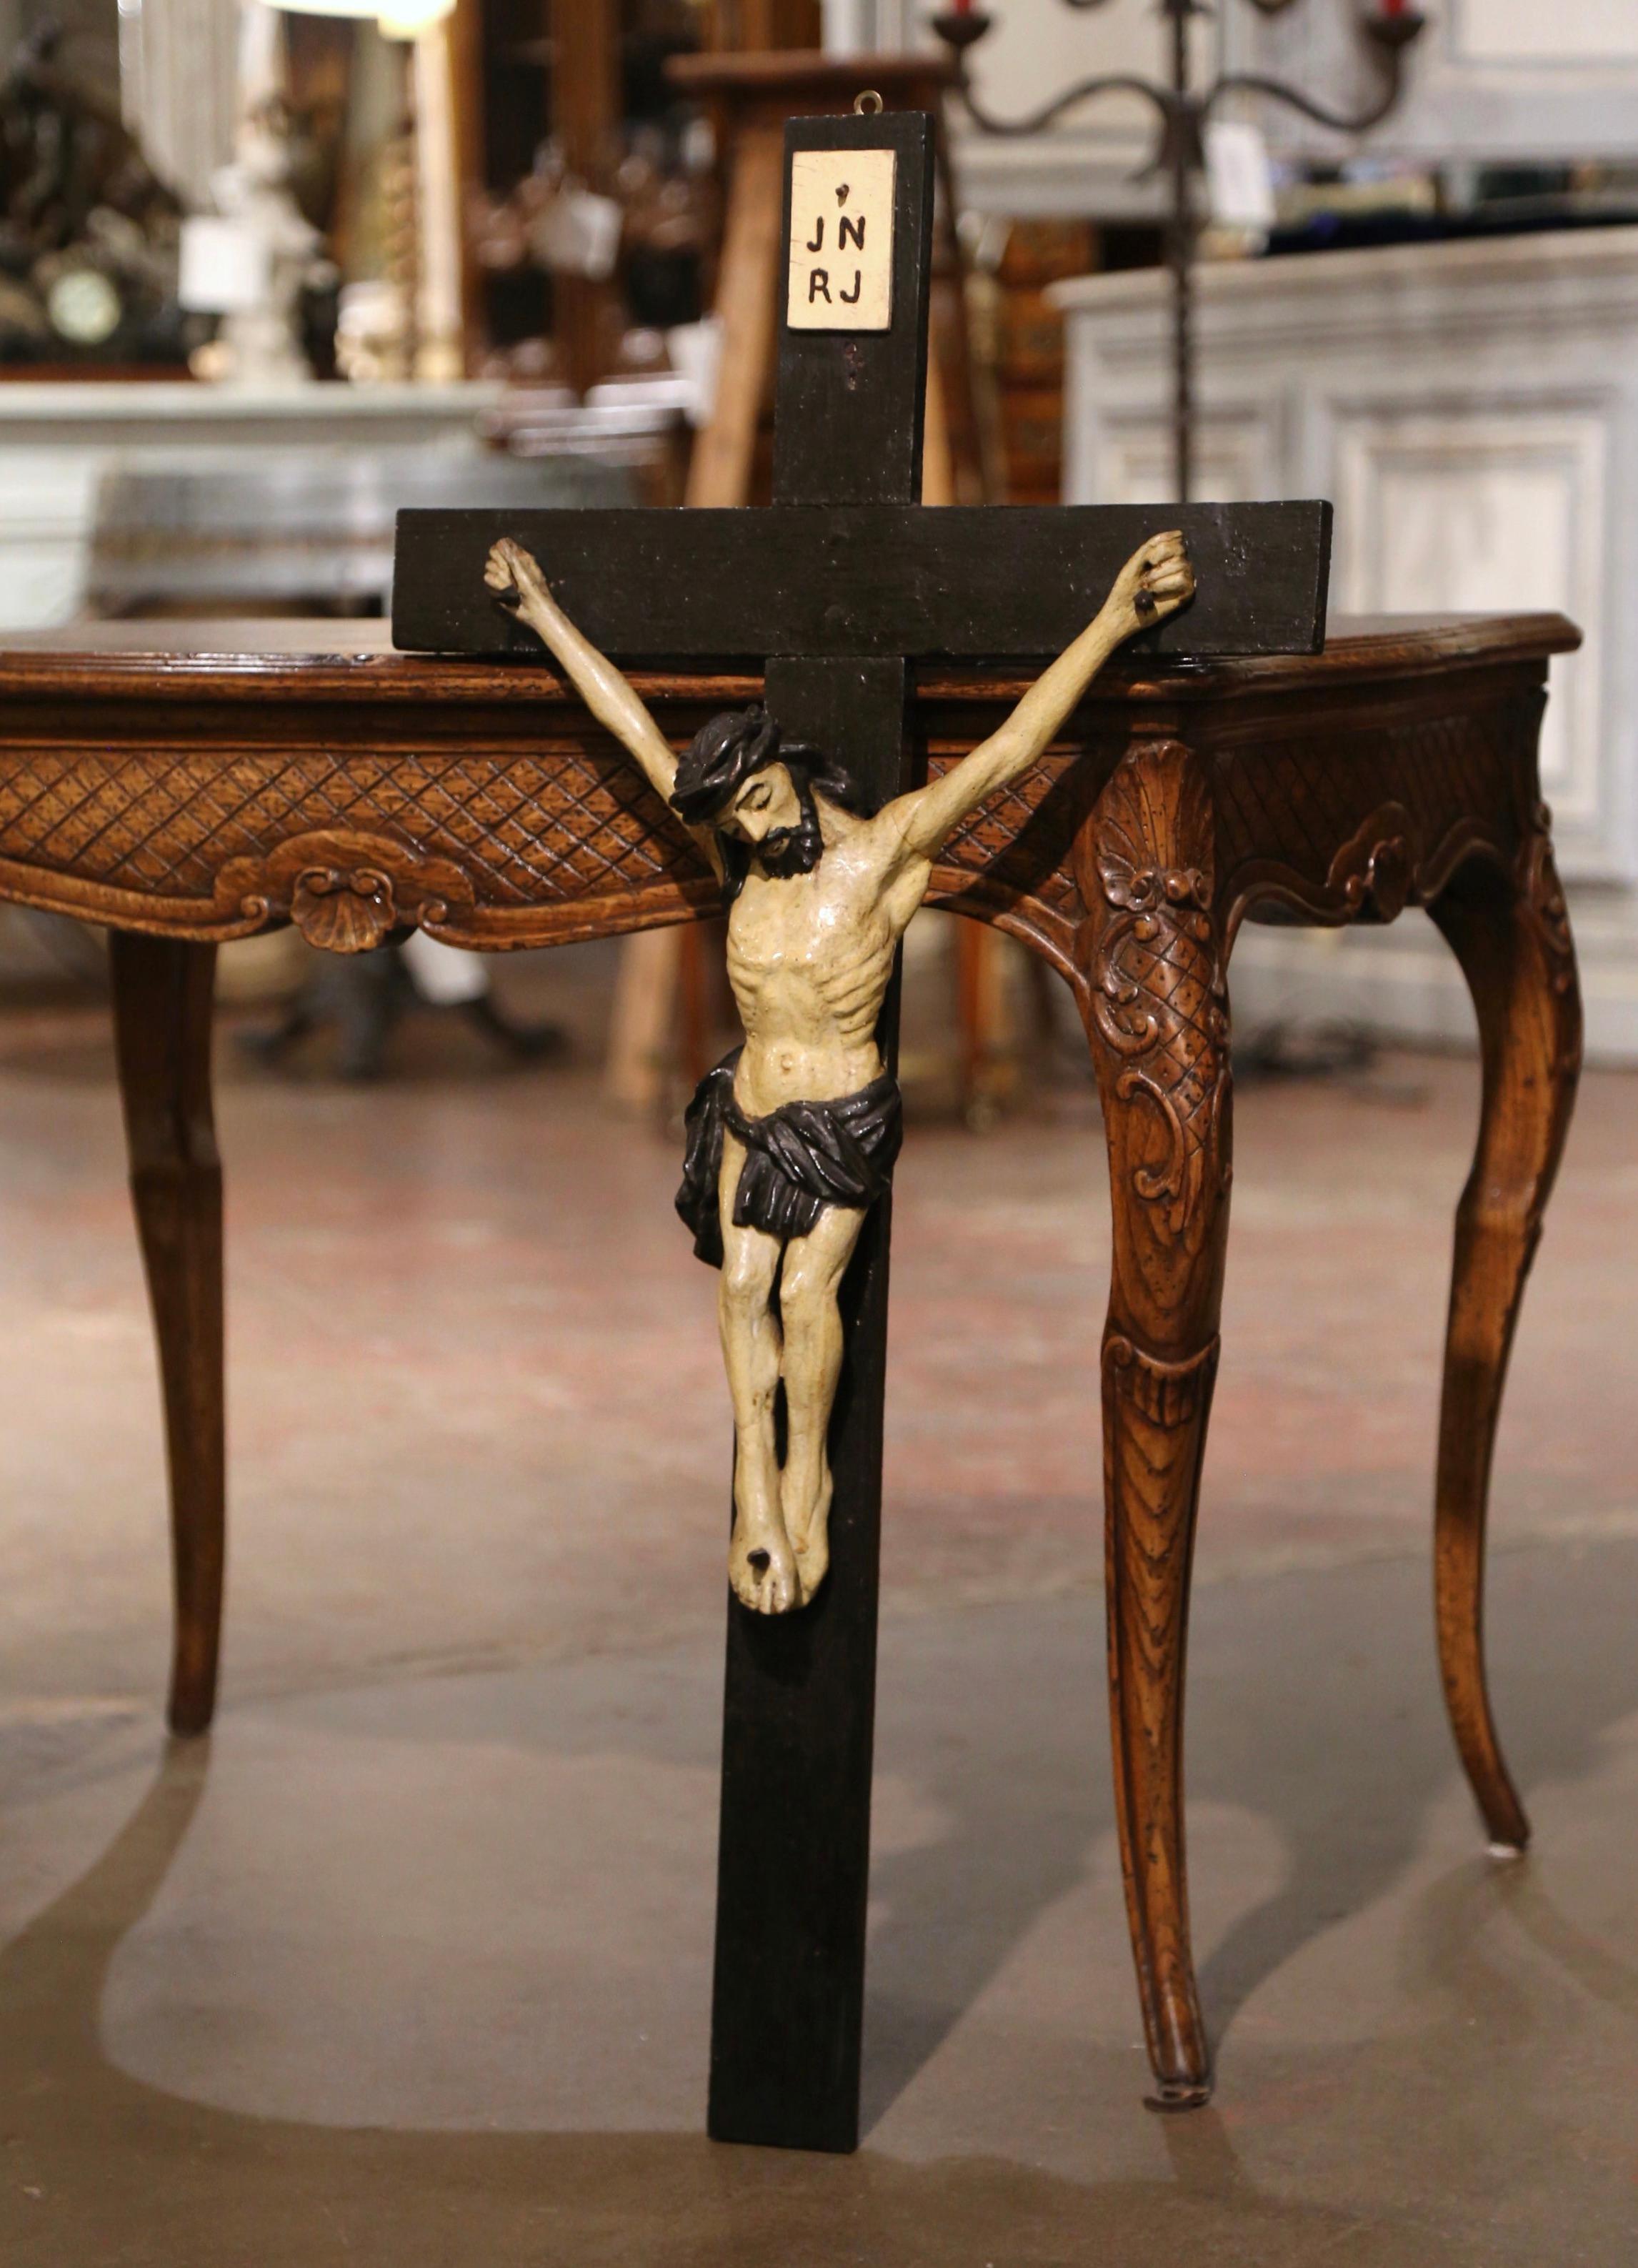 This antique carved statue of Christ nailed on the cross was crafted in France, circa 1850. Found in a private chapel in the Rhone Valley, the large cross features a detailed hand carved sculpture of Jesus nailed on a wooden cross with forged iron